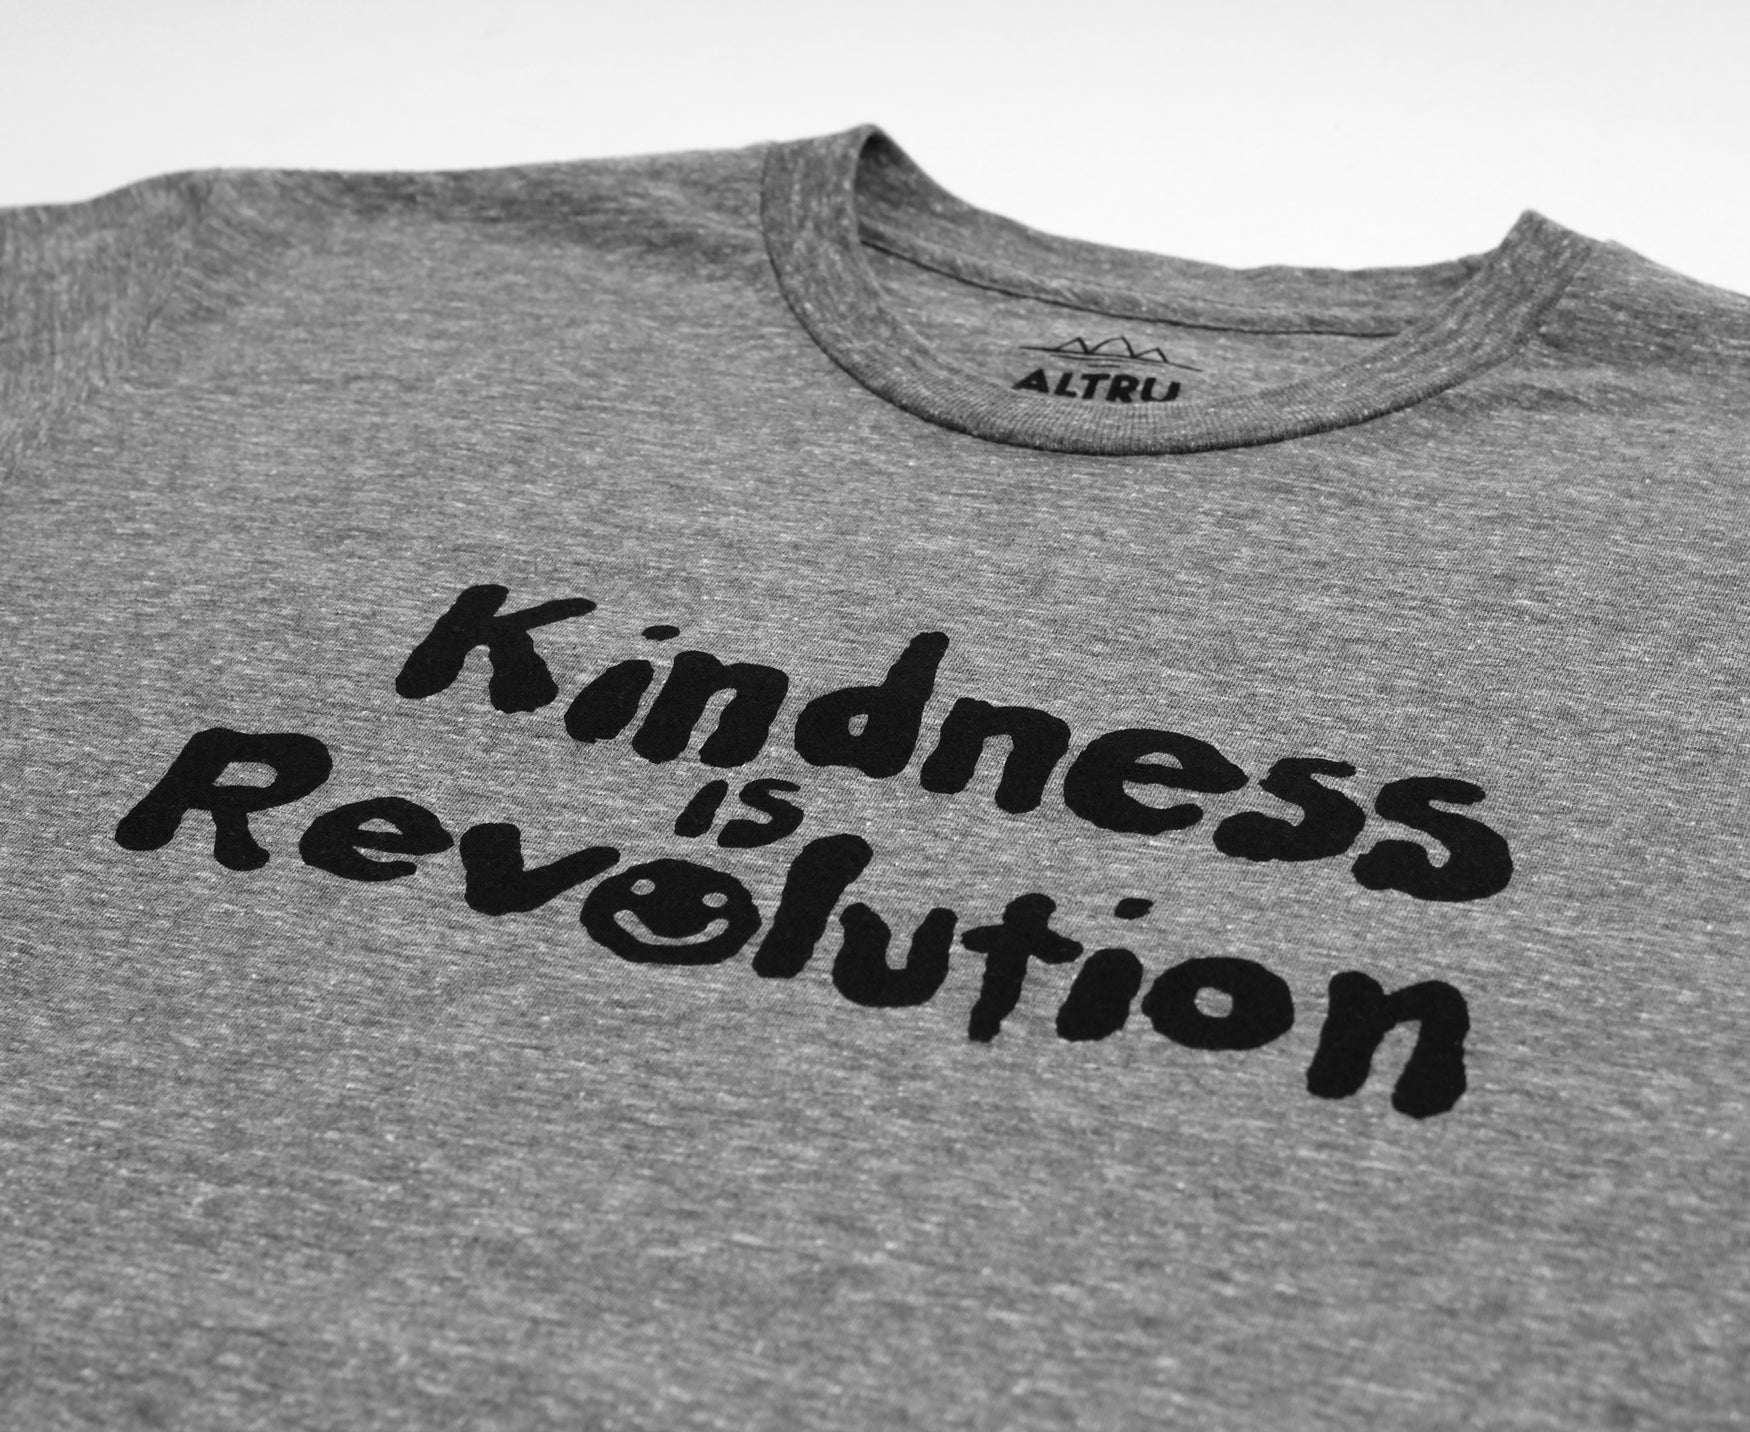 Kindness is Revolution, gray graphic tee by Altru Apparel